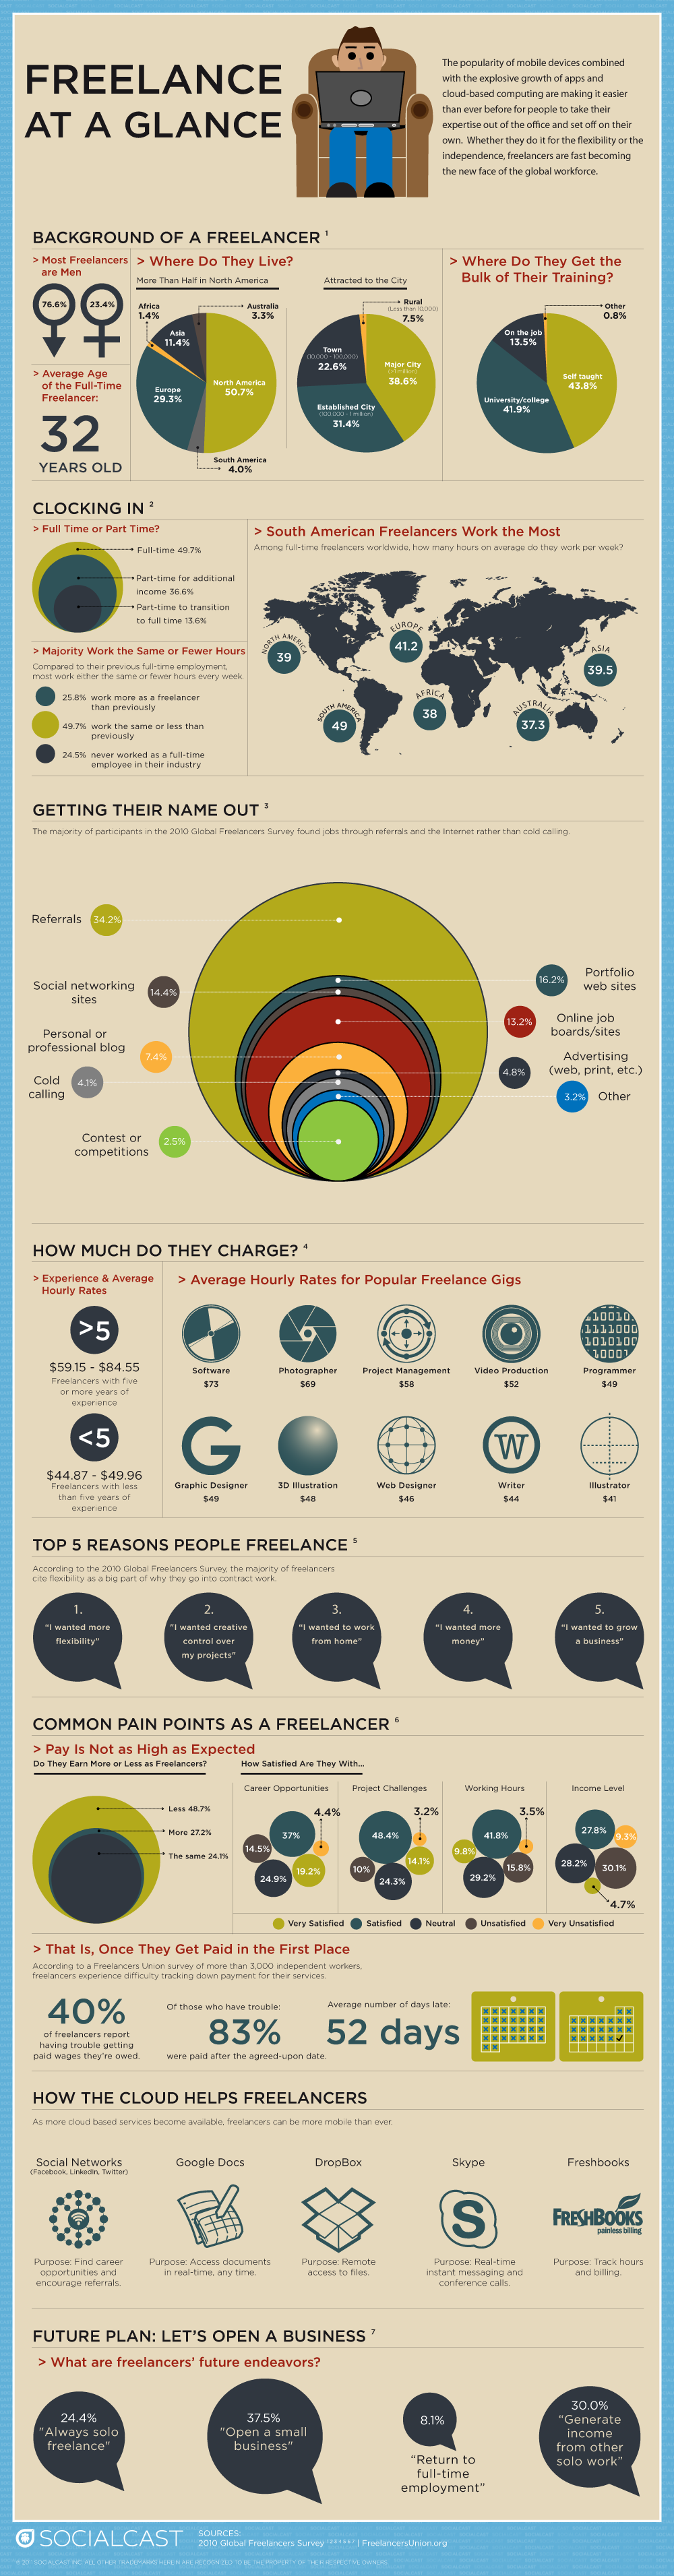 Freelance-At-A-Glance-Infographic-1